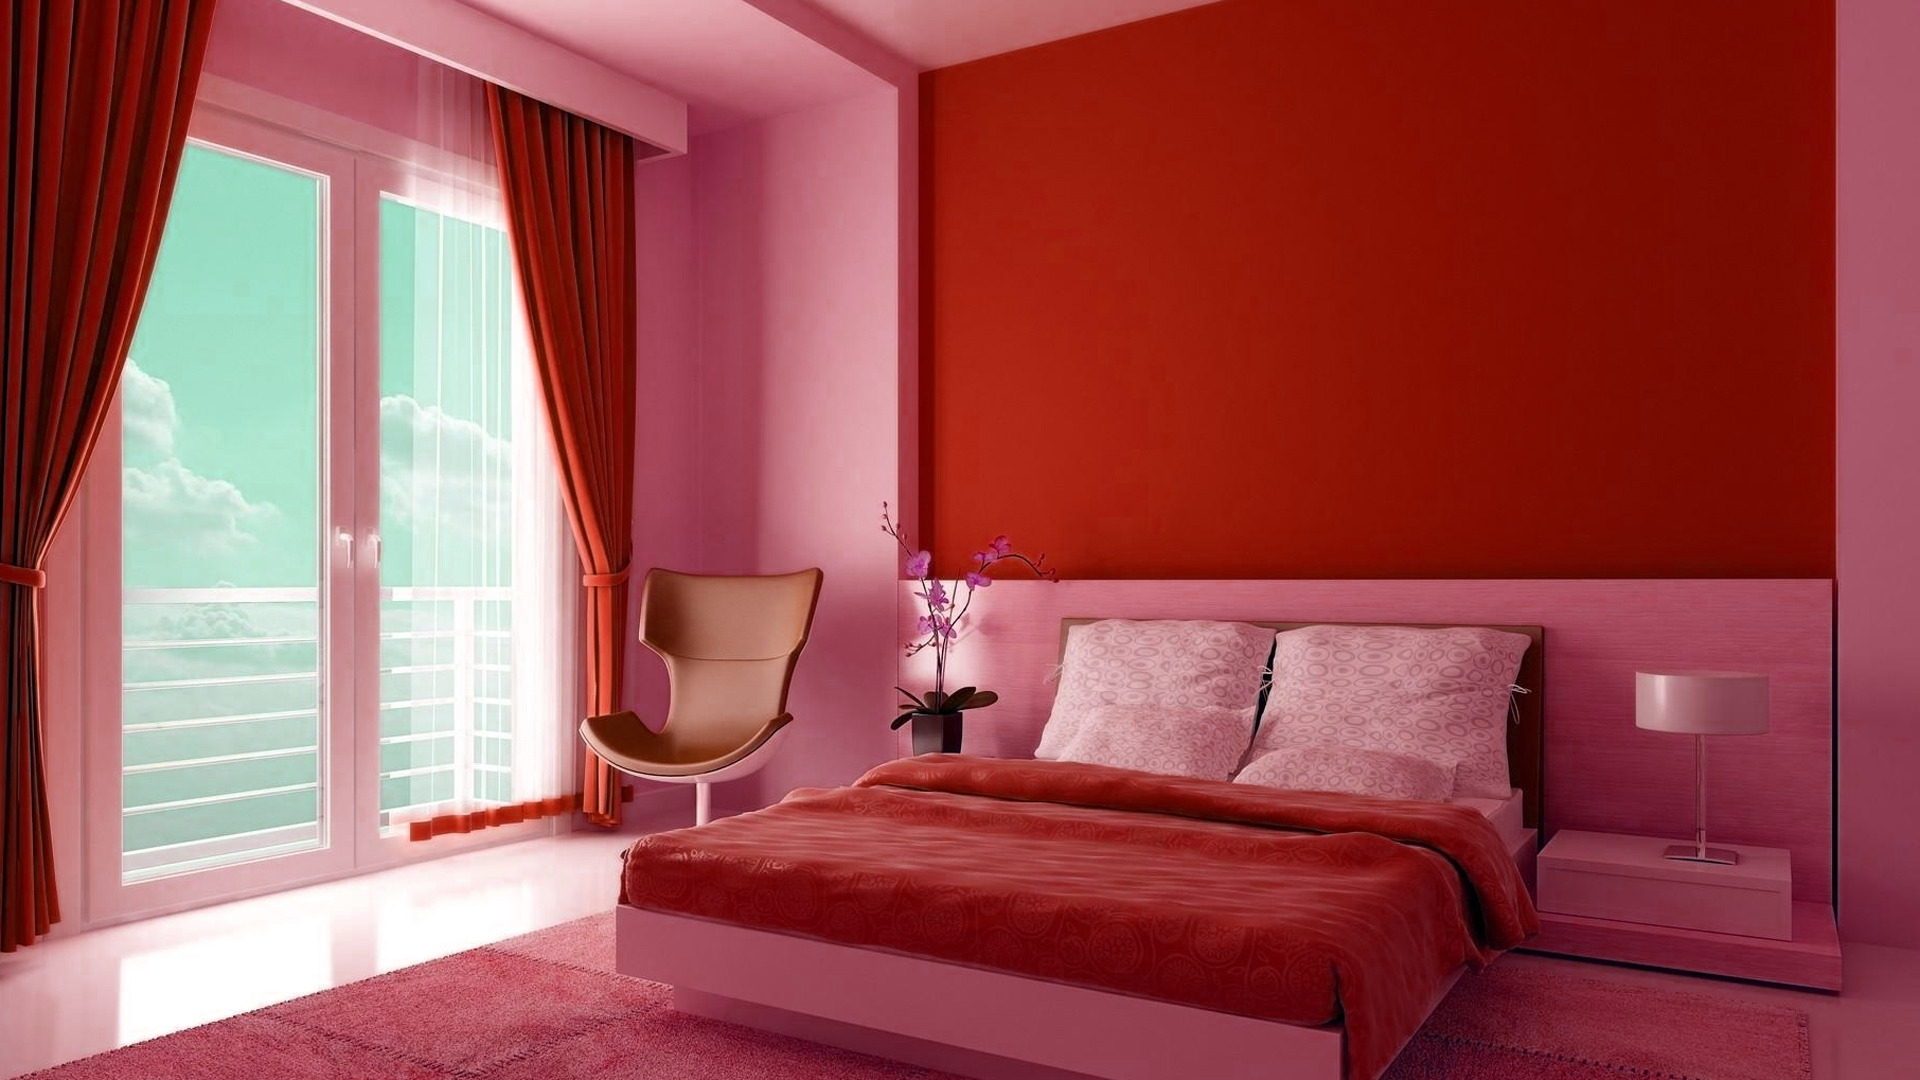 66 Colored Bedroom Color Schemes Red Inspiration Bedroom Ideas inside proportions 1920 X 1080